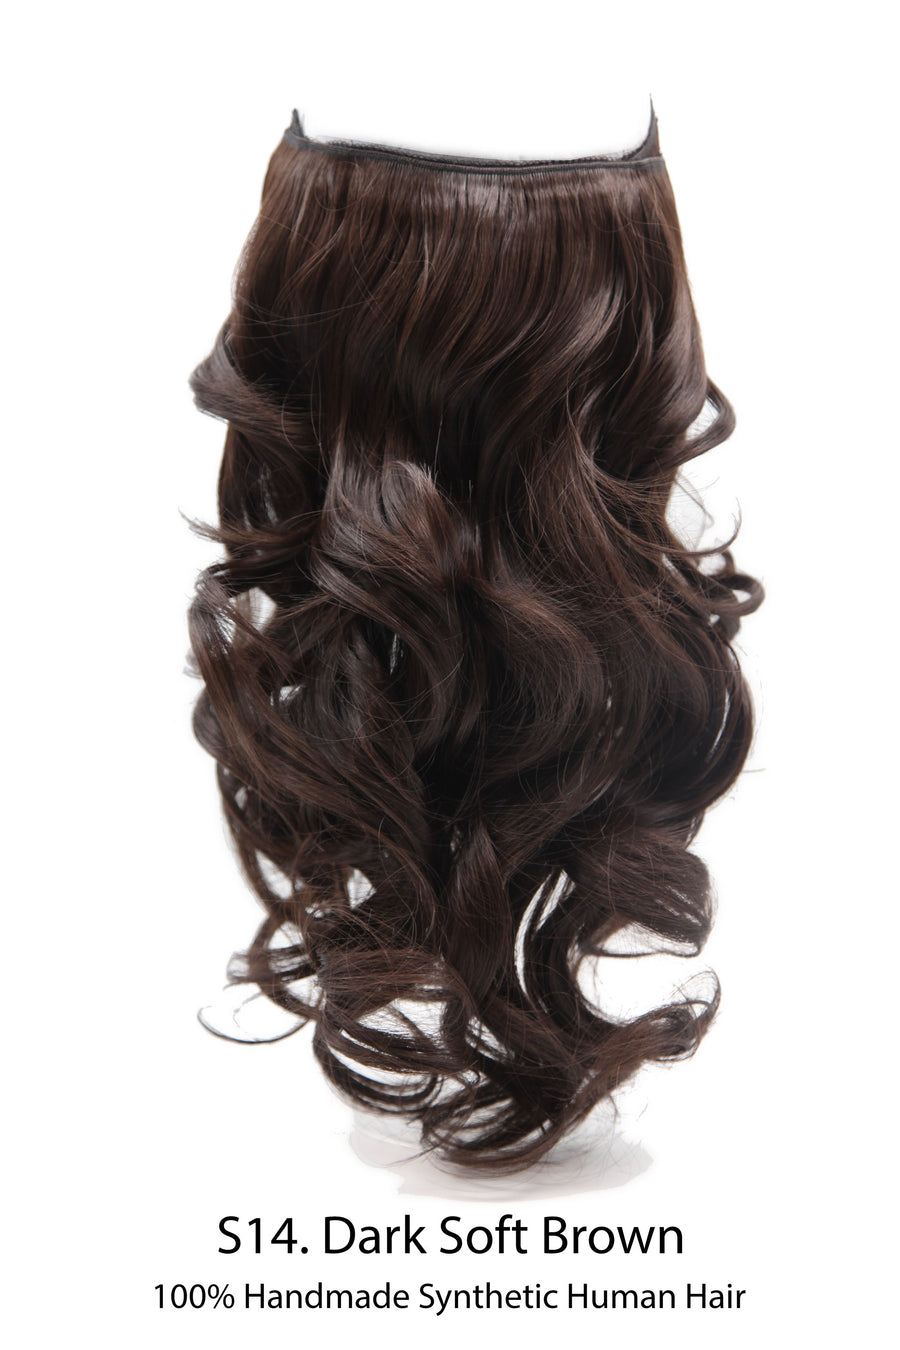 Aura -  Invisible Wired Halo FUTURA (Microfiber) Hair Extension Available in 15" and 19" - Soho Style Canada